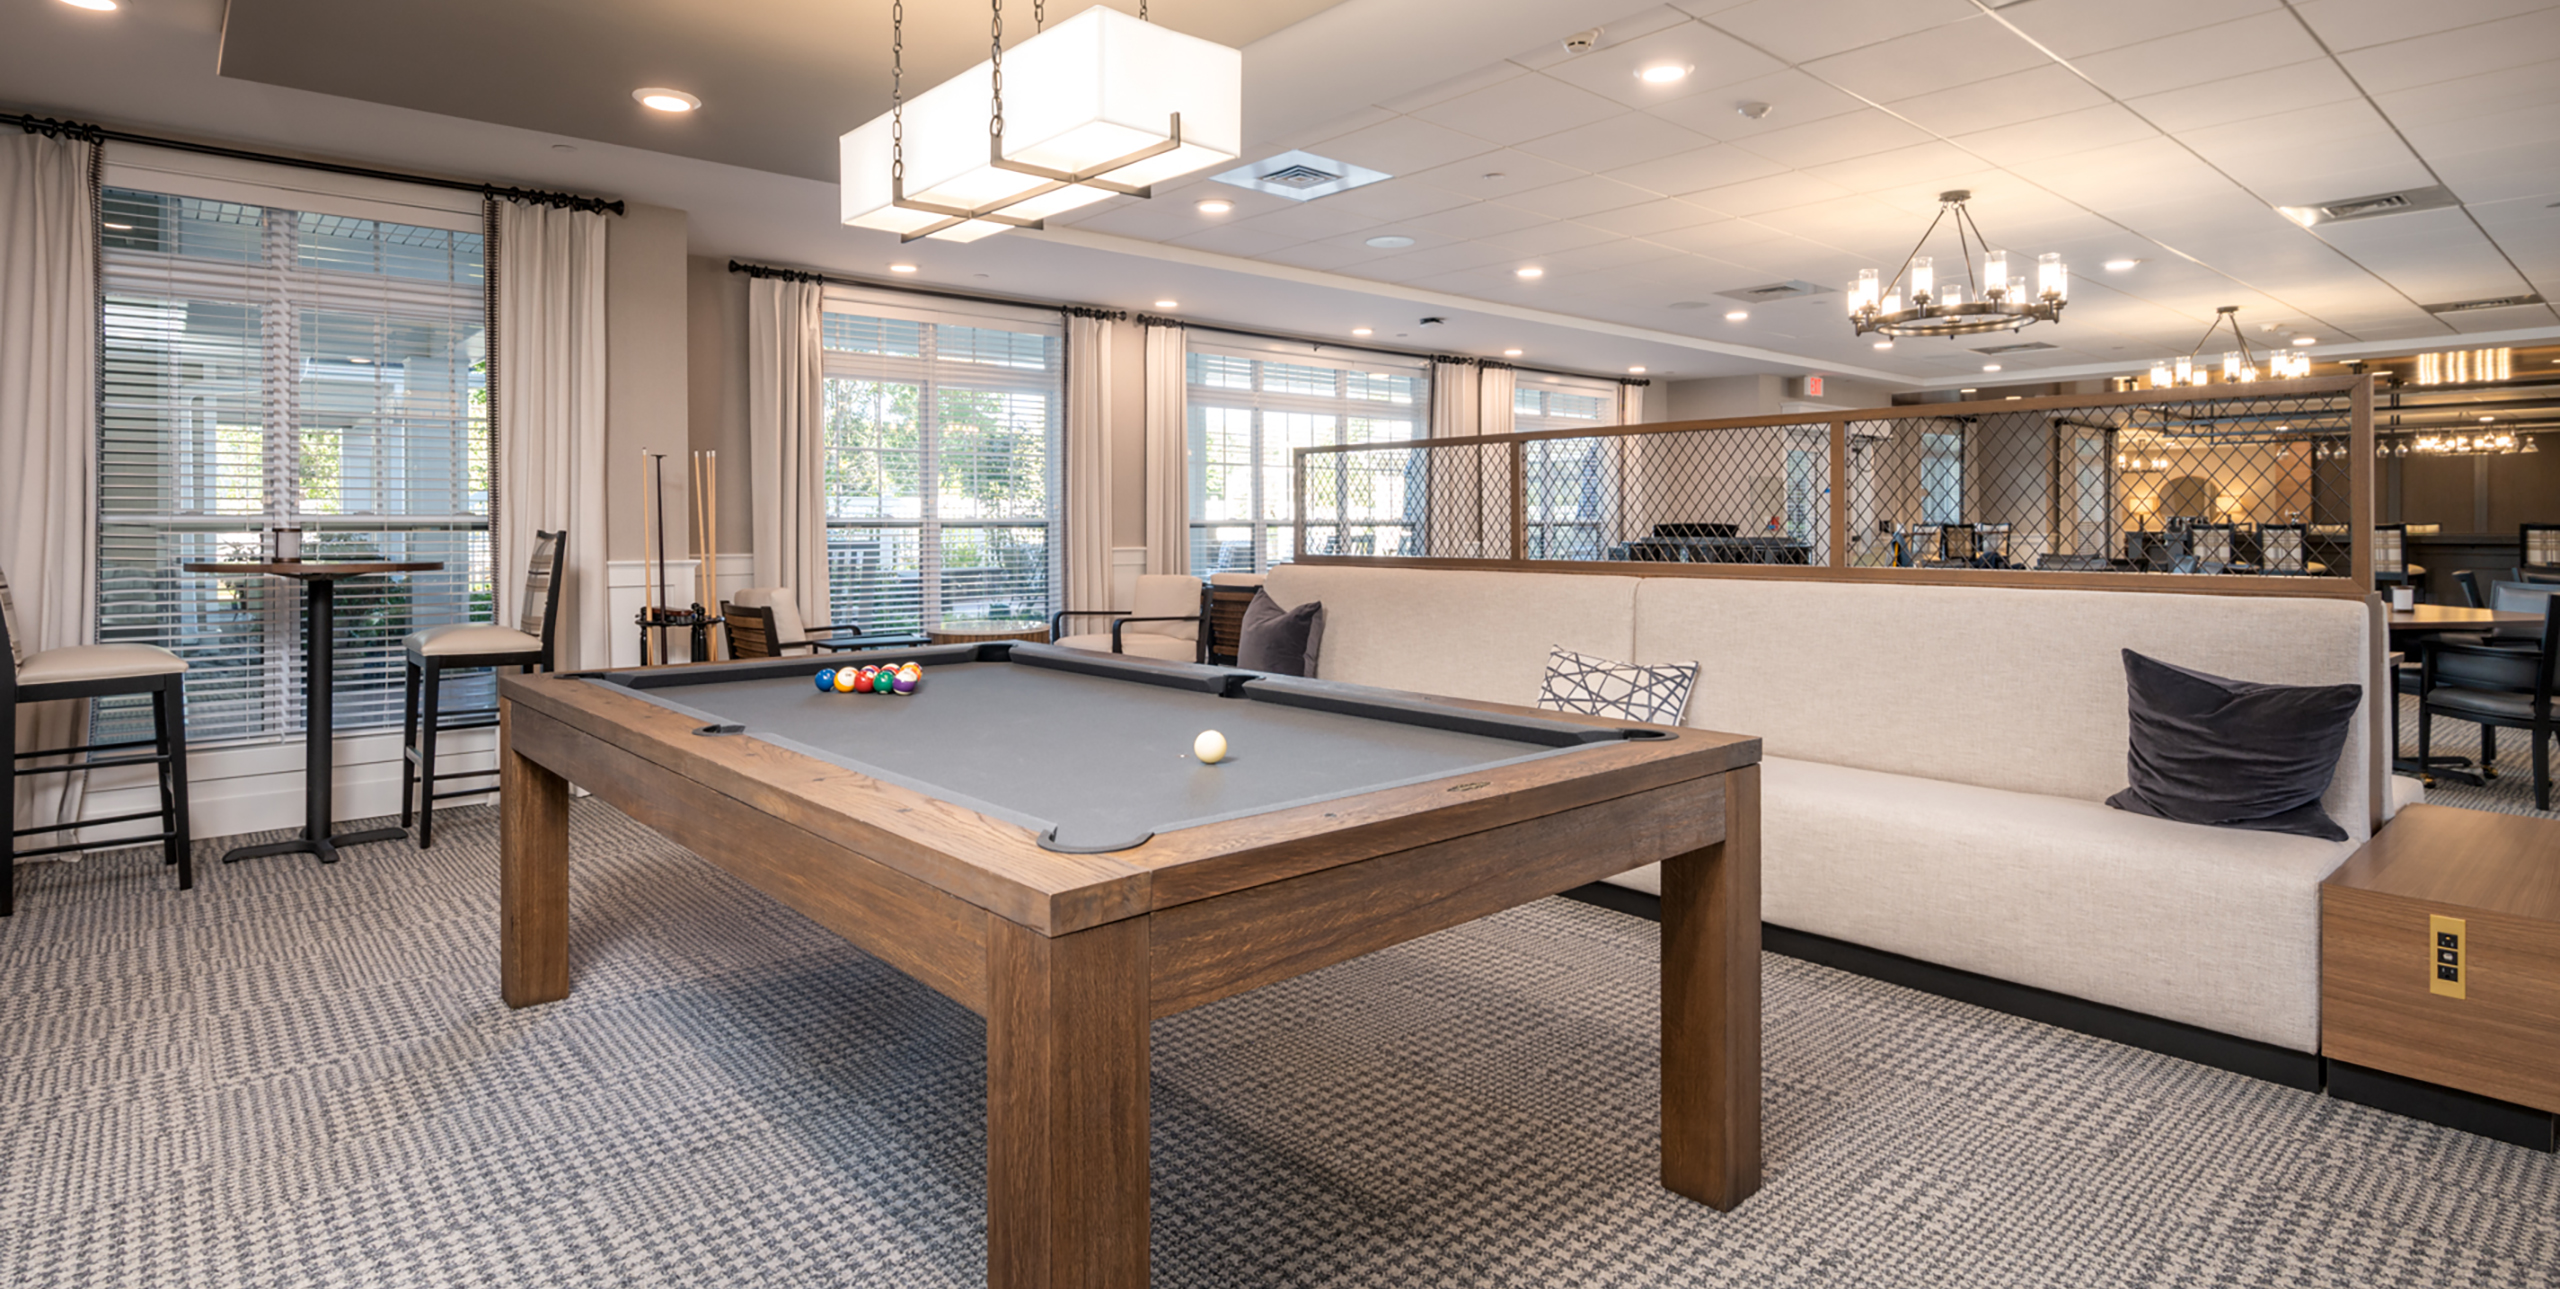 Pool table in the game room at Brightview Senior Living Port Jeff